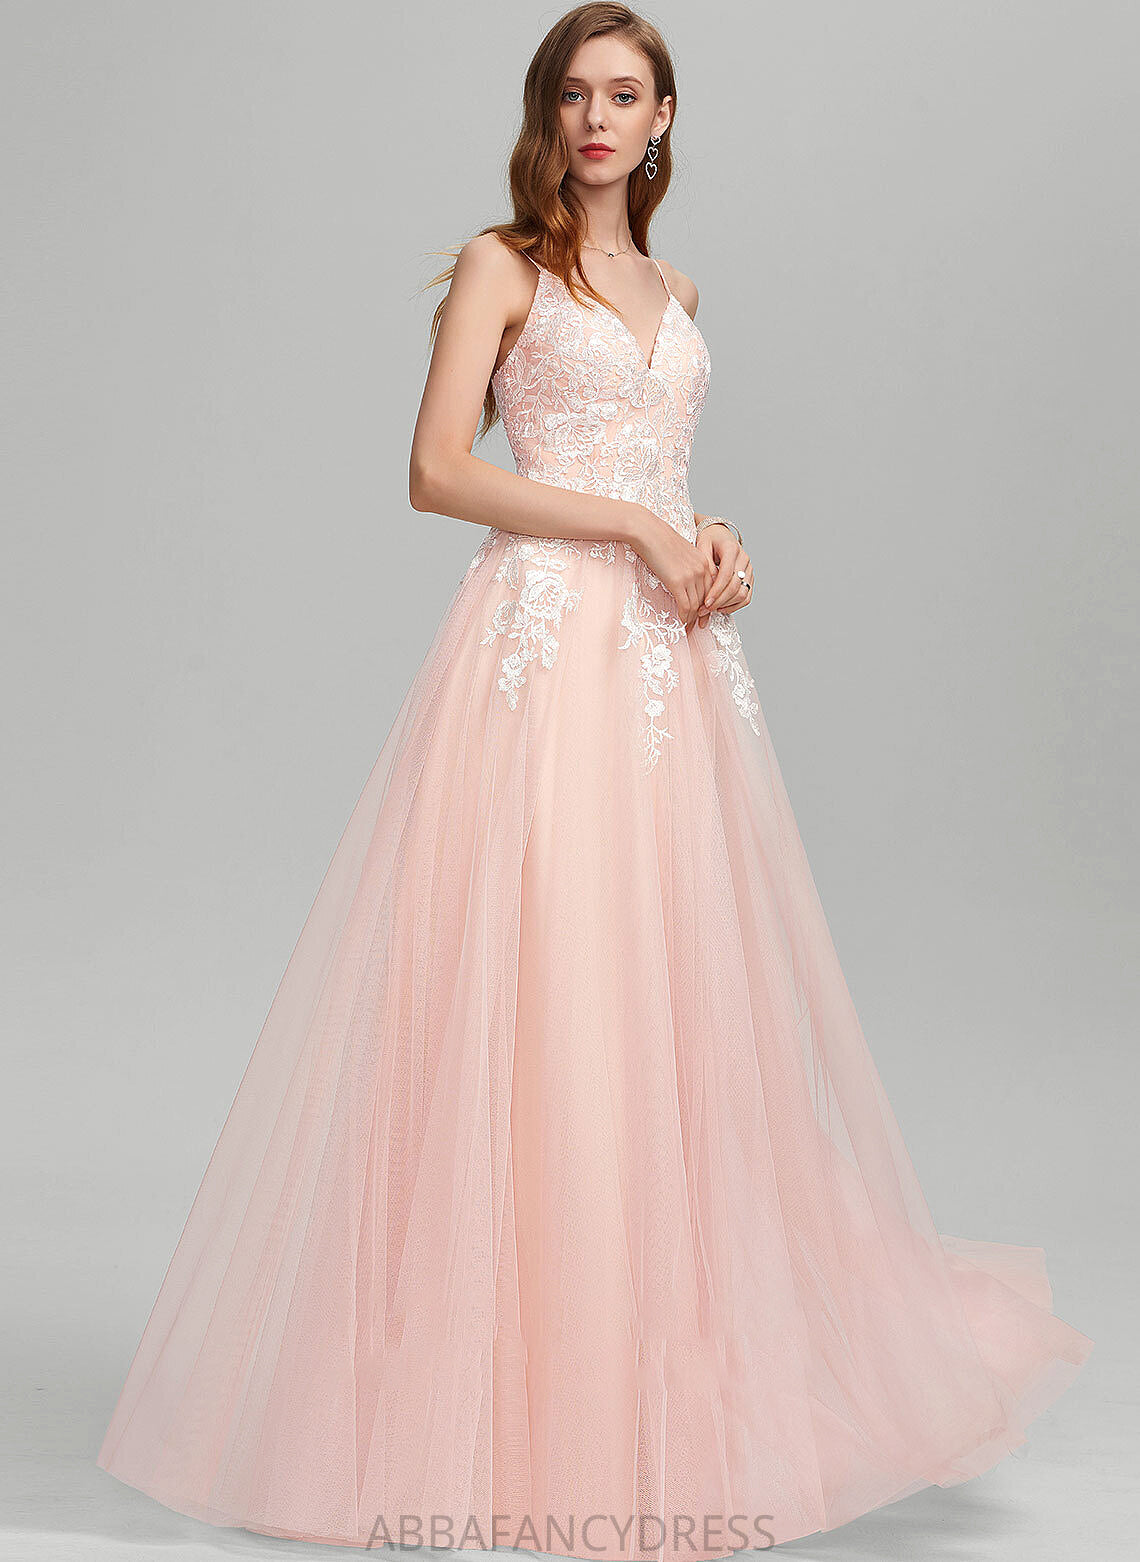 Wedding Sequins Dress Sweetheart Ball-Gown/Princess Tulle Floor-Length Clare Wedding Dresses With